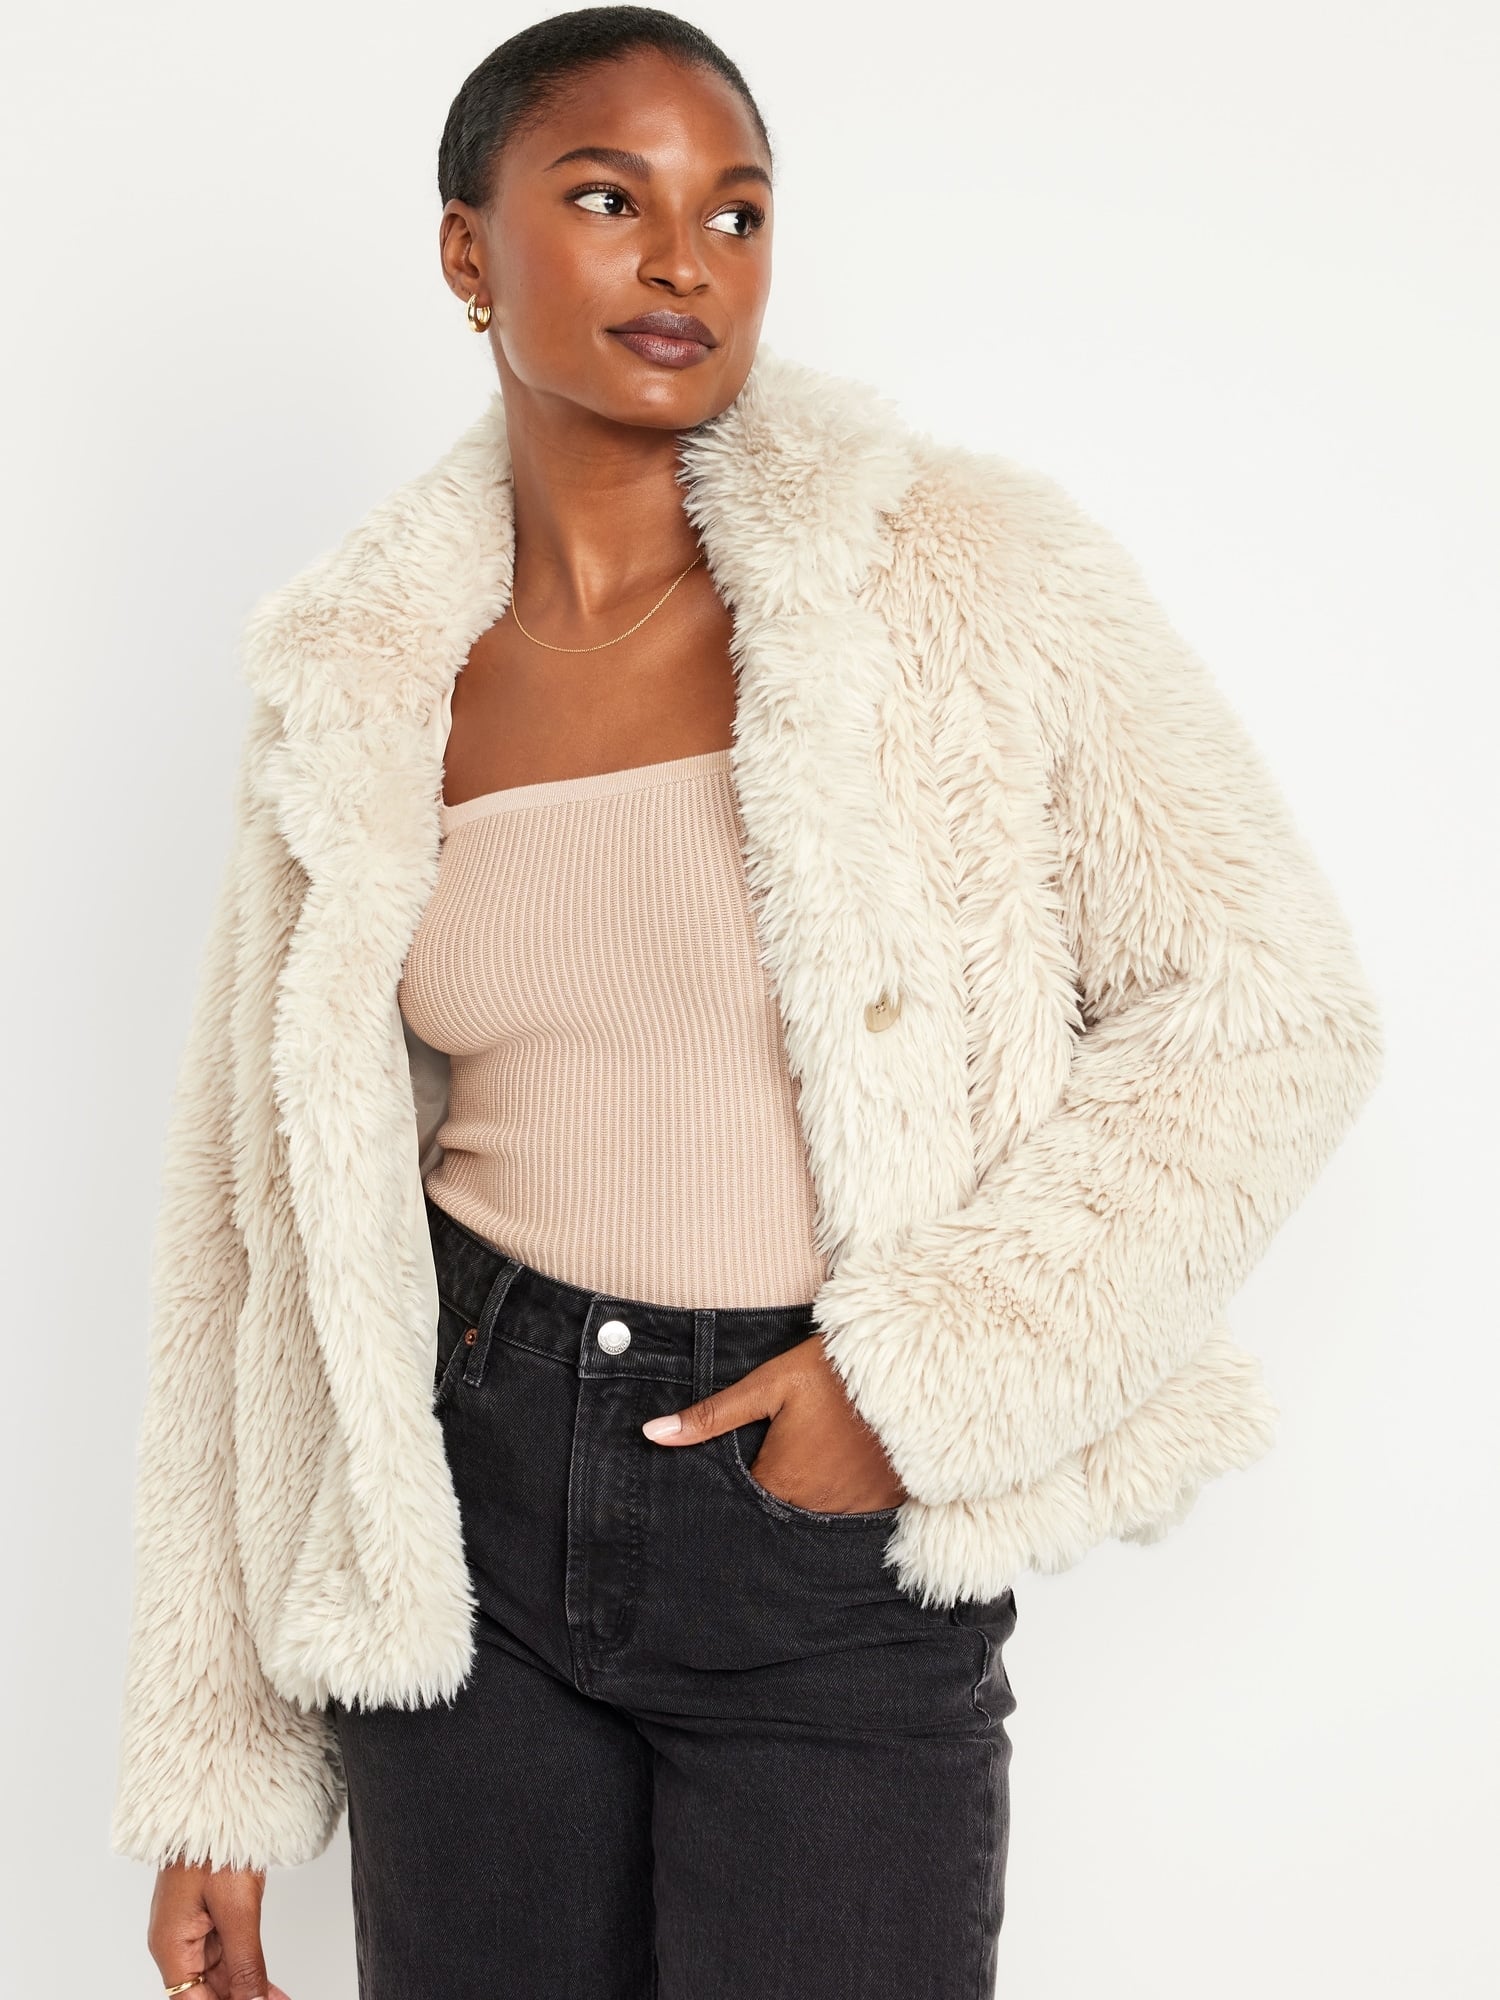 Discover Elegance: Blue Fox Fur Jackets for Men and Women